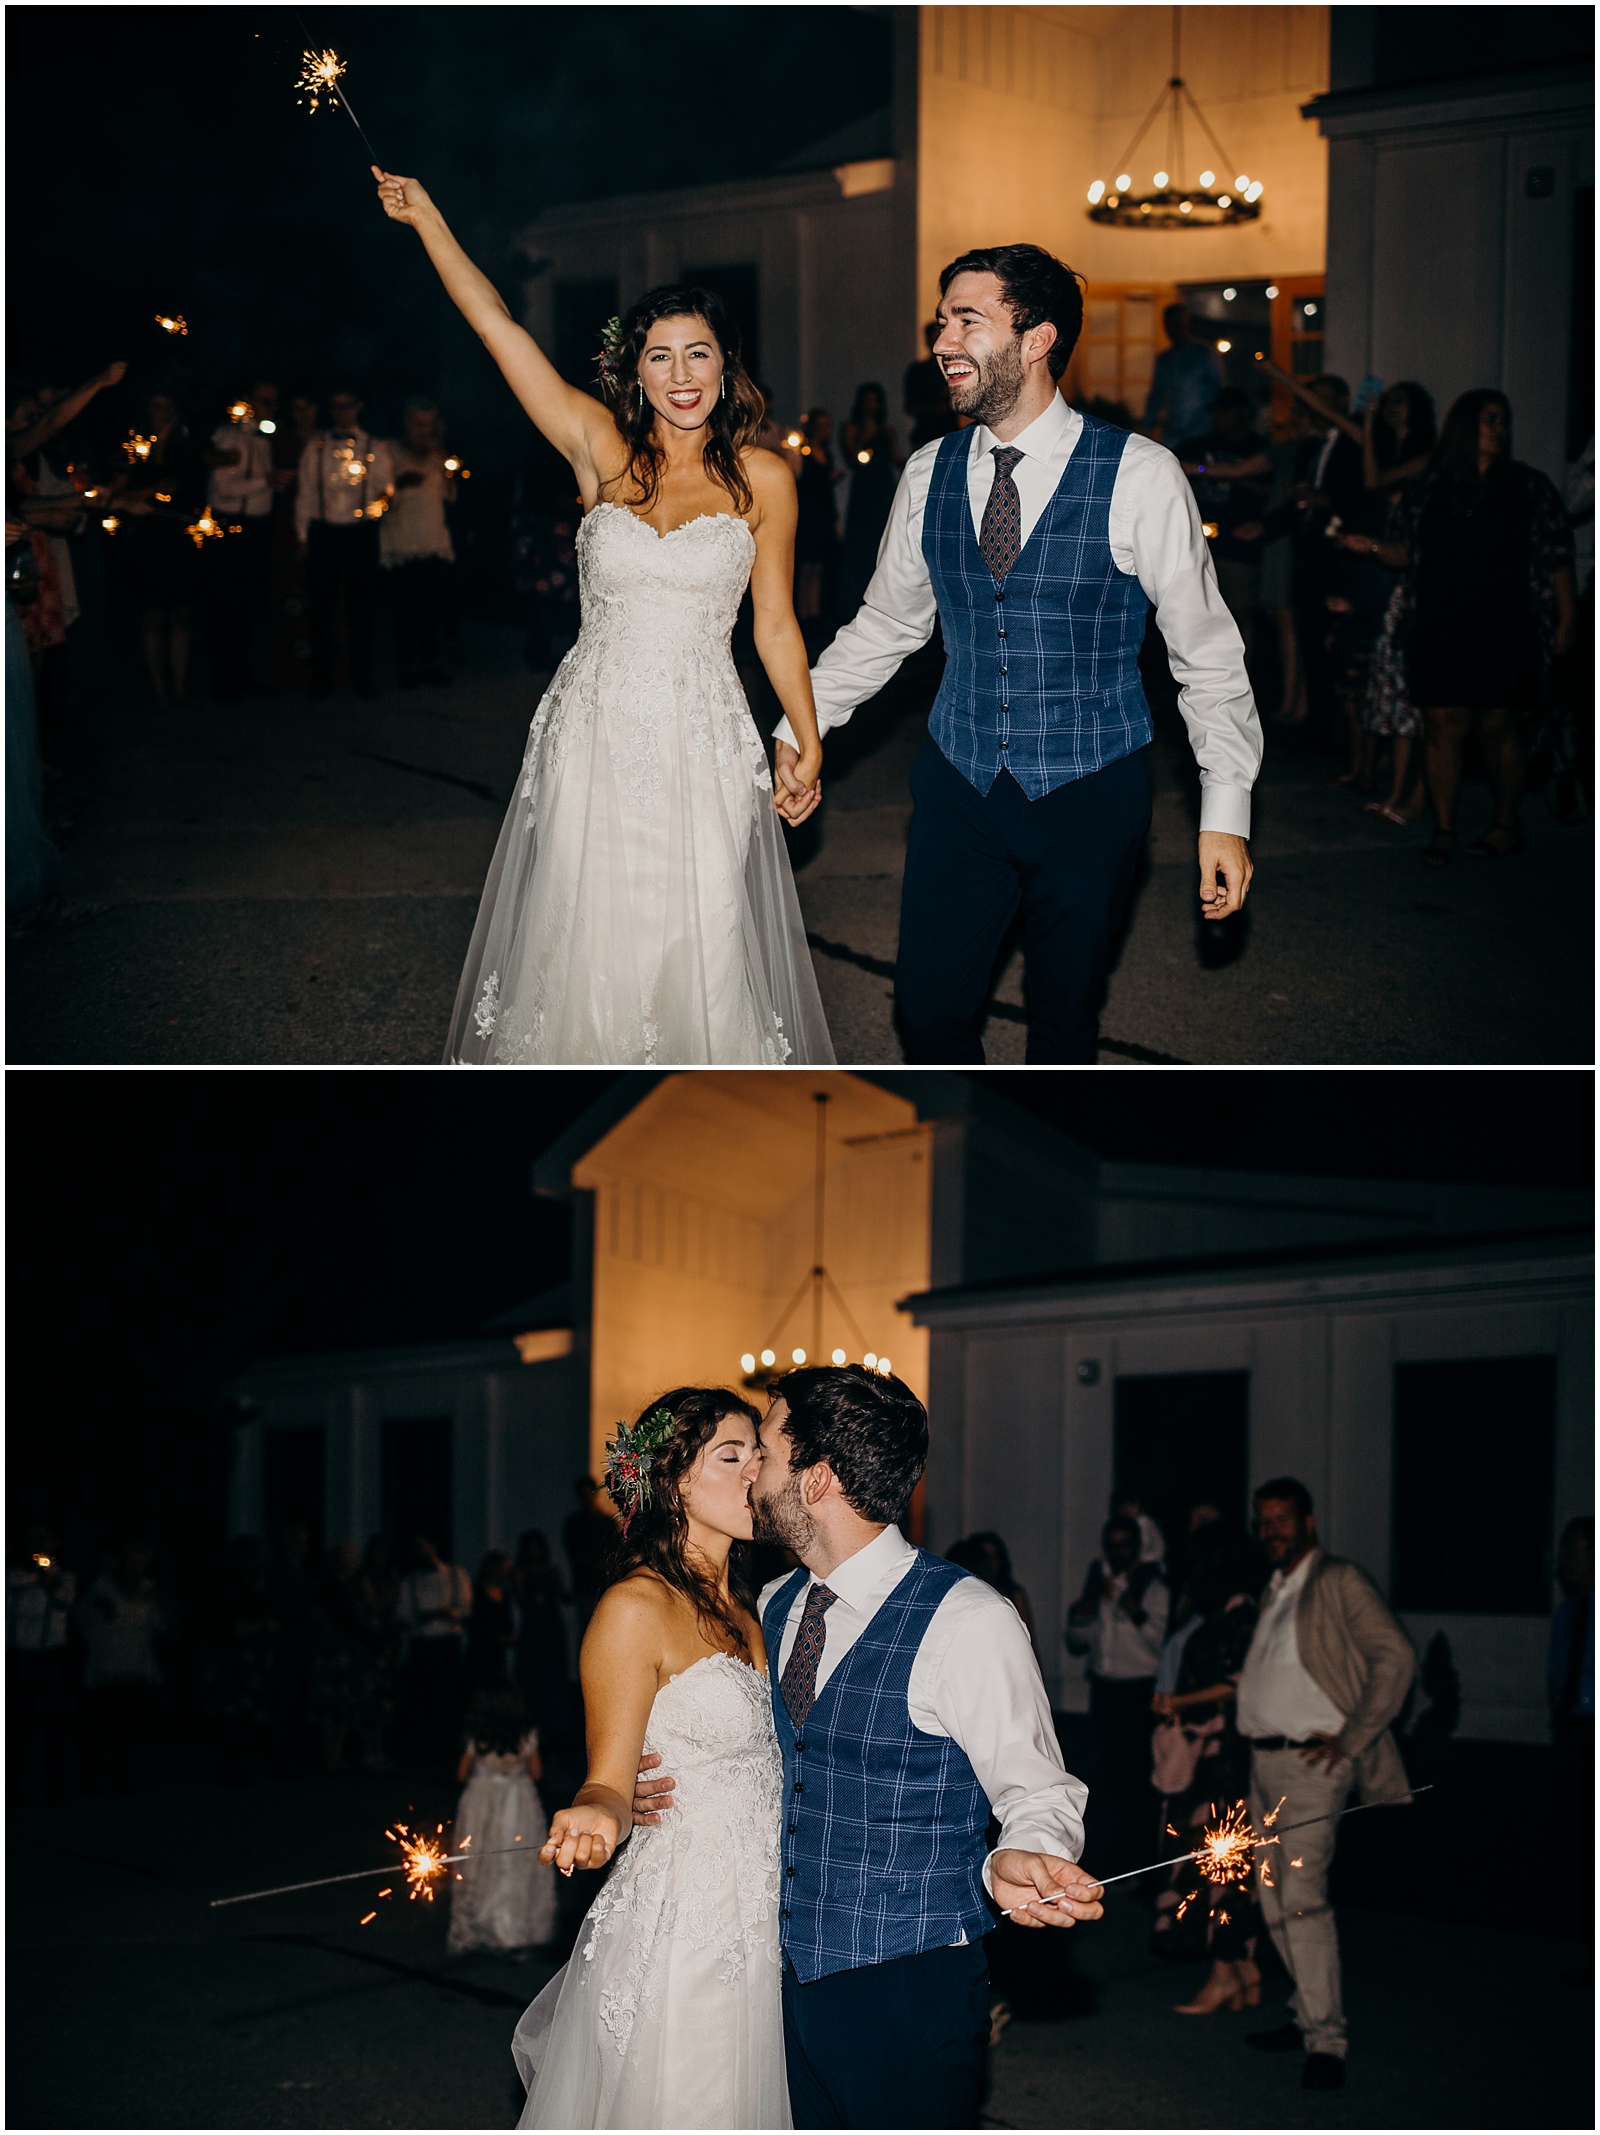 kindred bard, kindred north, Arkansas wedding photographer, scotland wedding photographer, outdoor wedding, Arkansas wedding photographer, mismatched bridesmaids dresses, barn wedding, first look, sparkler exit, the Johnsons photo, the Johnsons, Maine wedding photographer 